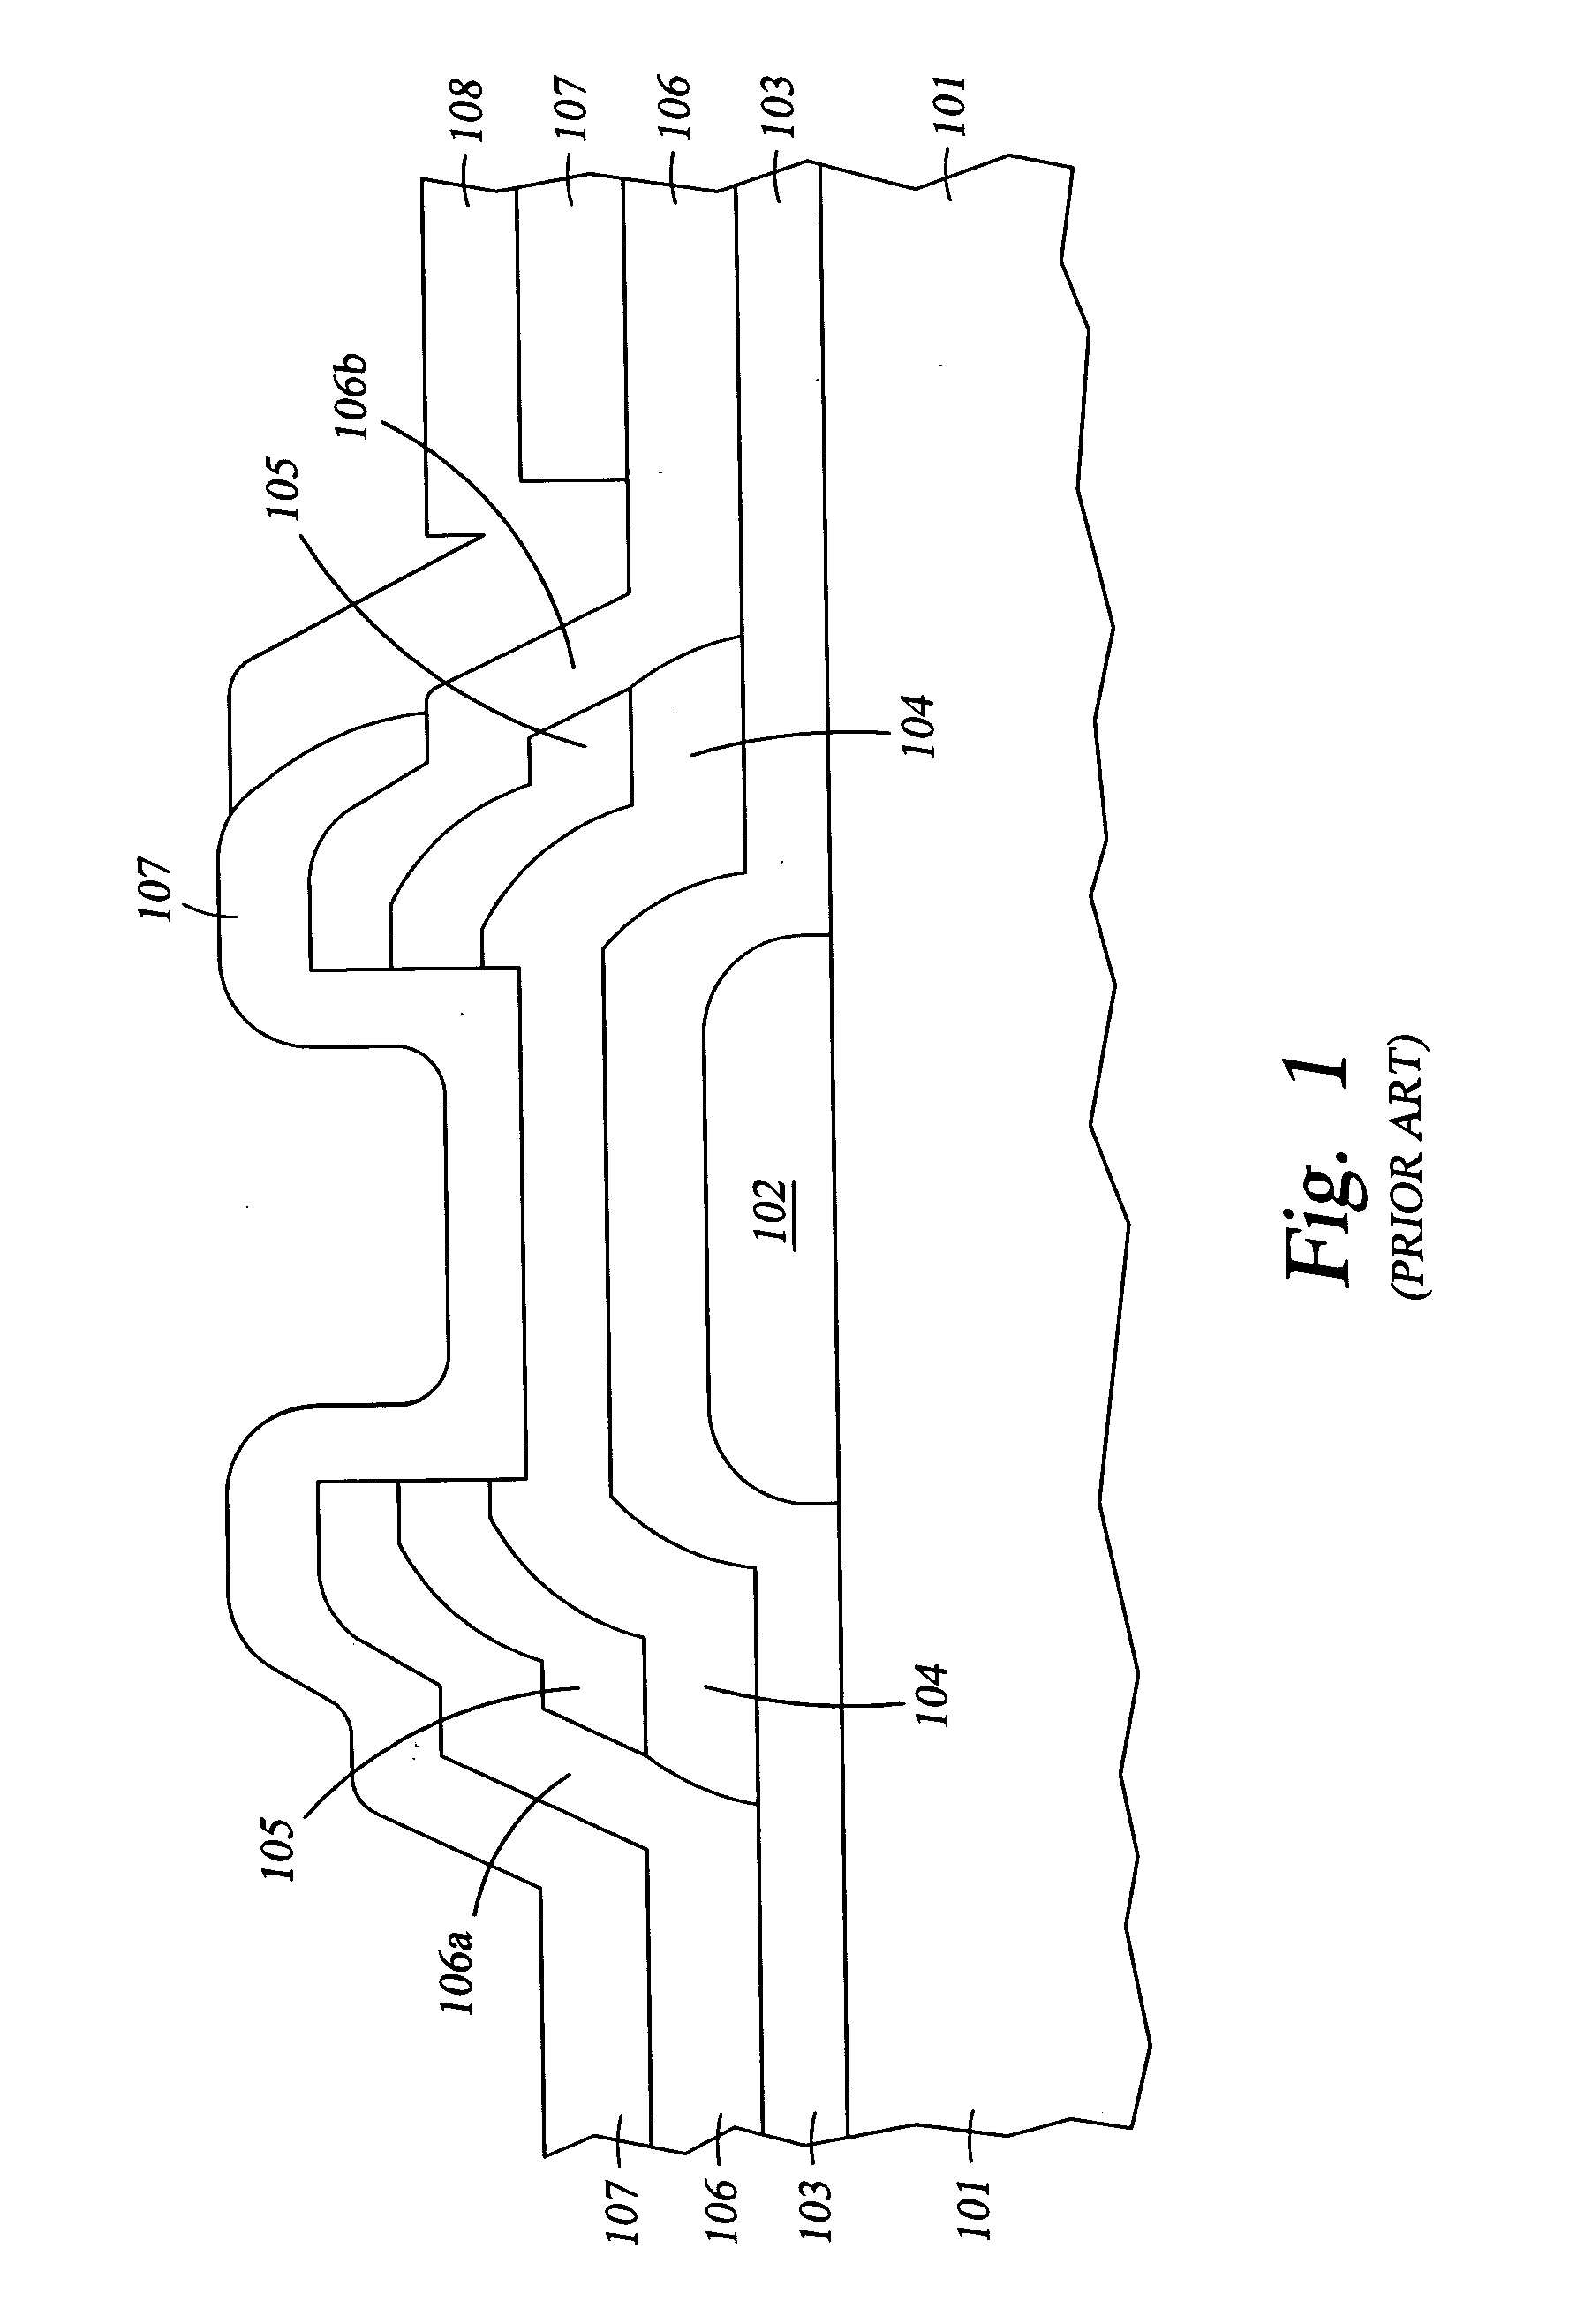 Method of controlling the uniformity of PECVD-deposited thin films